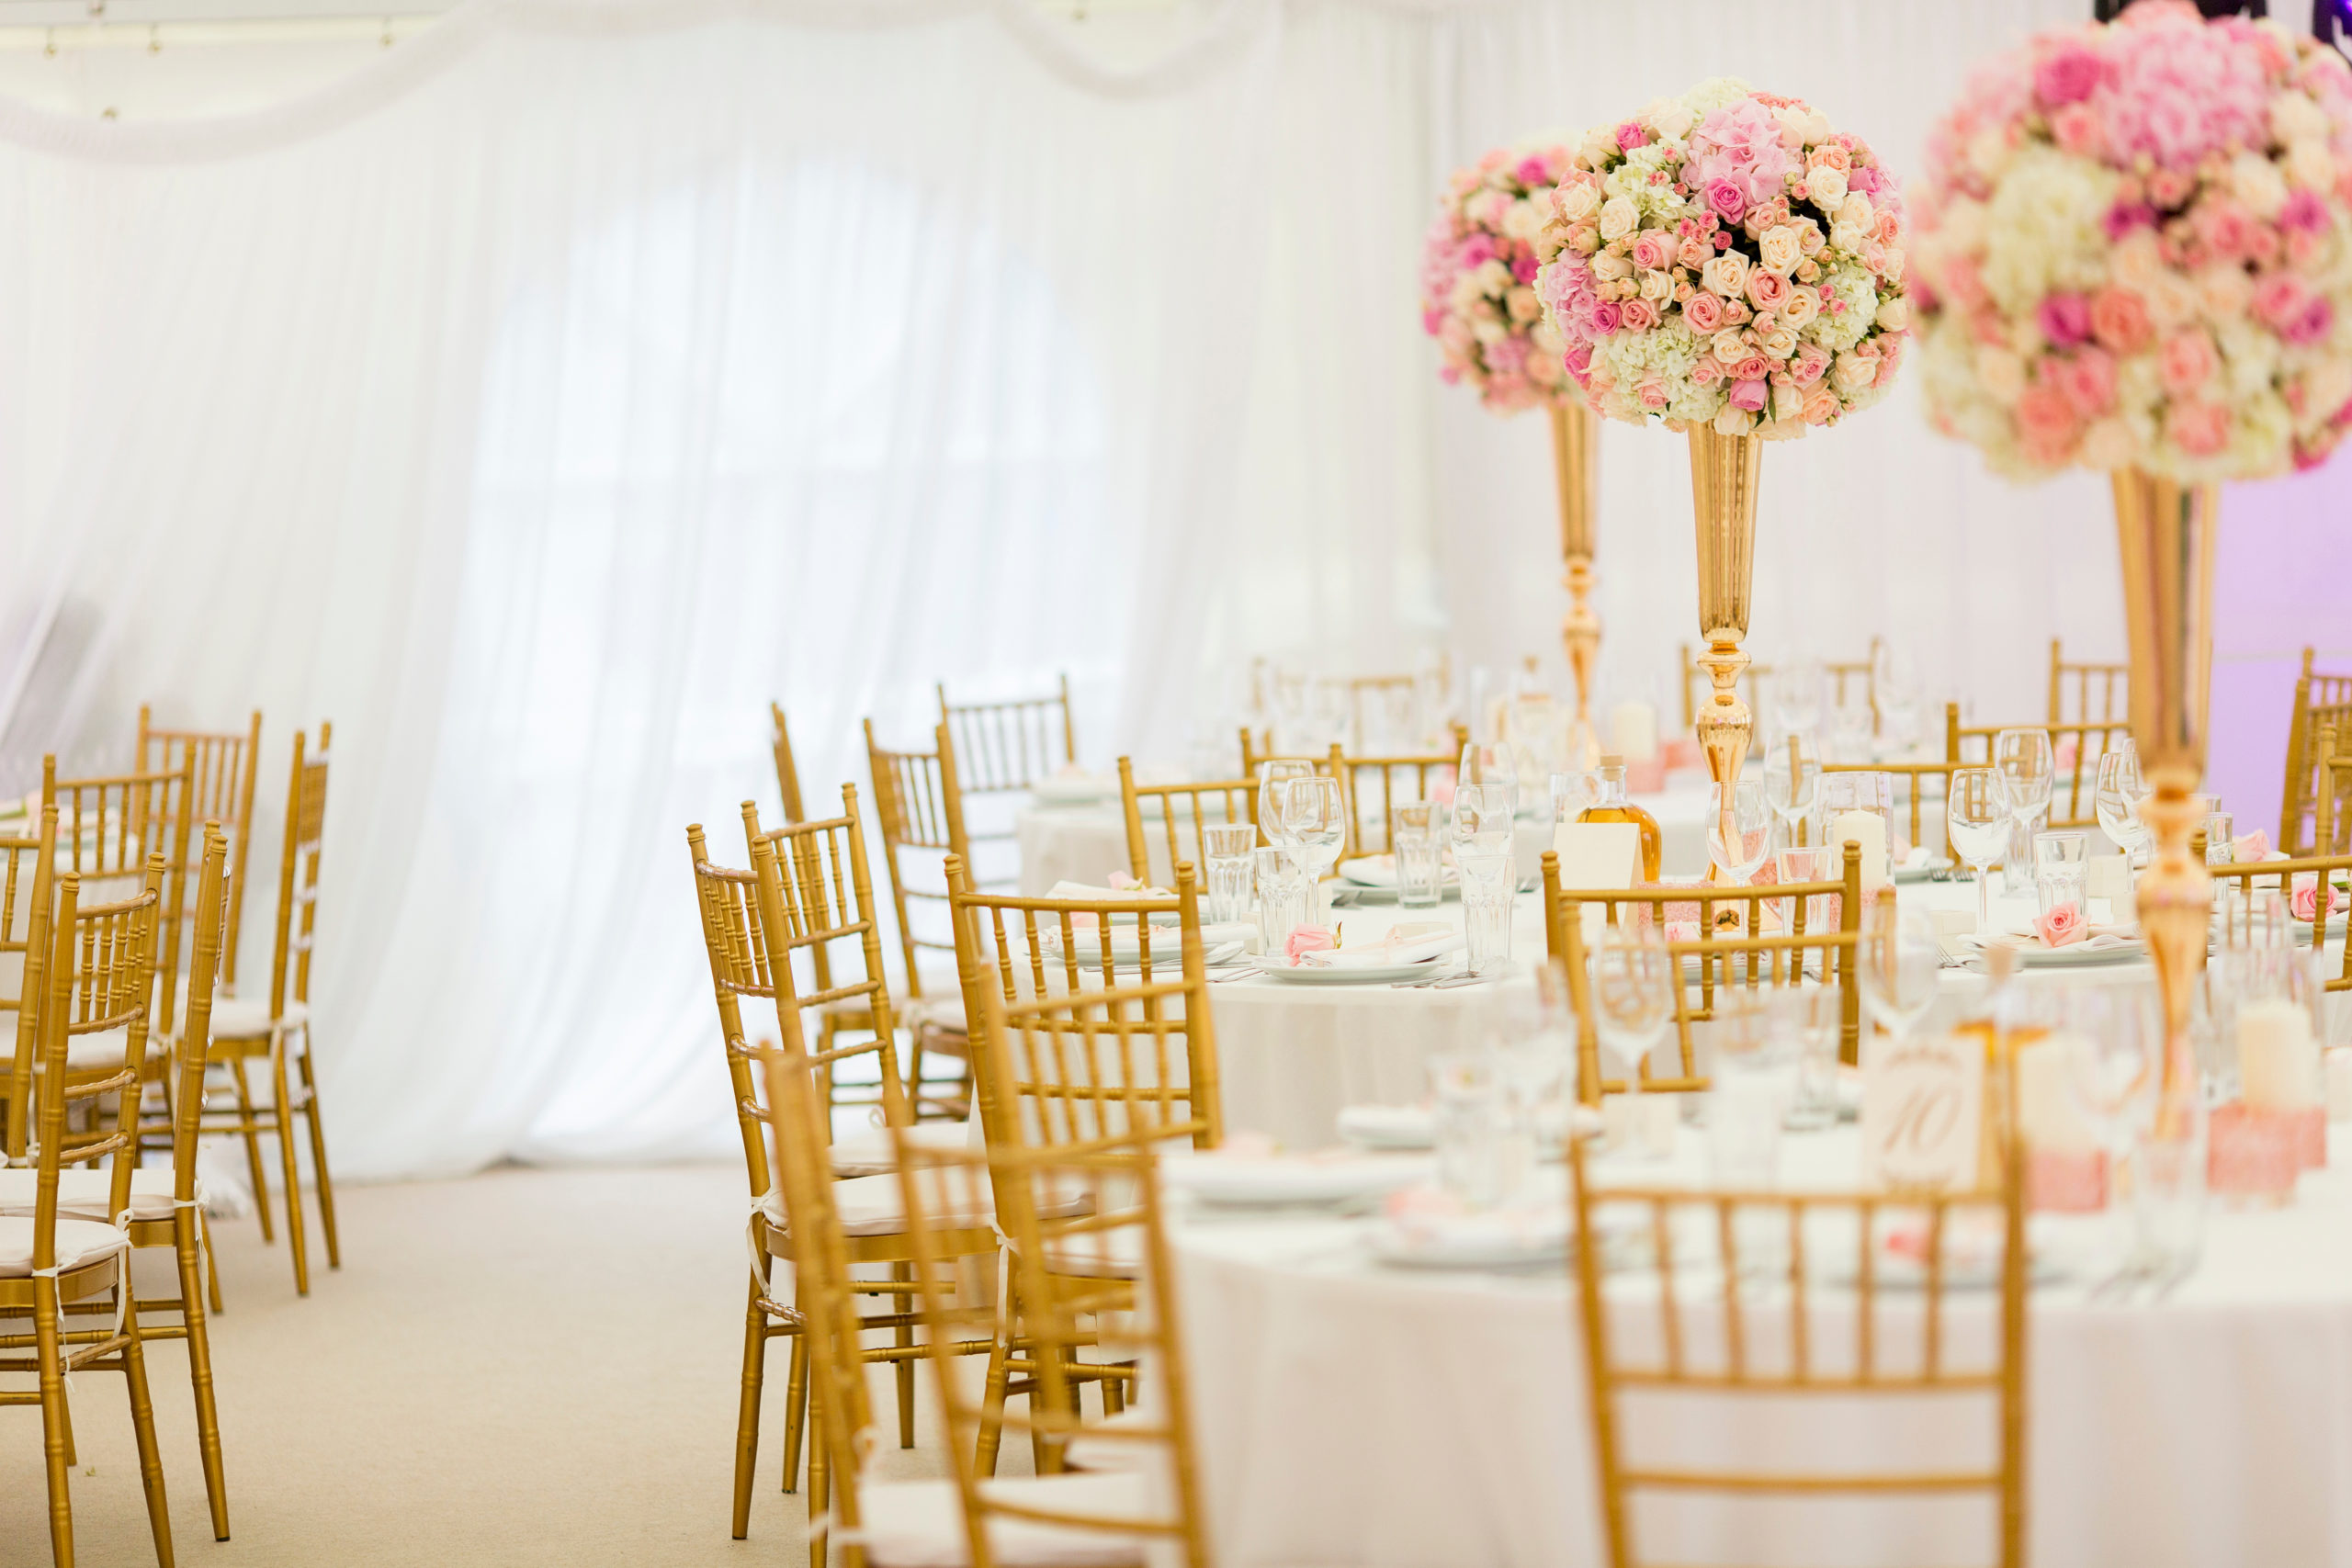 Closeup view of the luxurious wedding table decoration